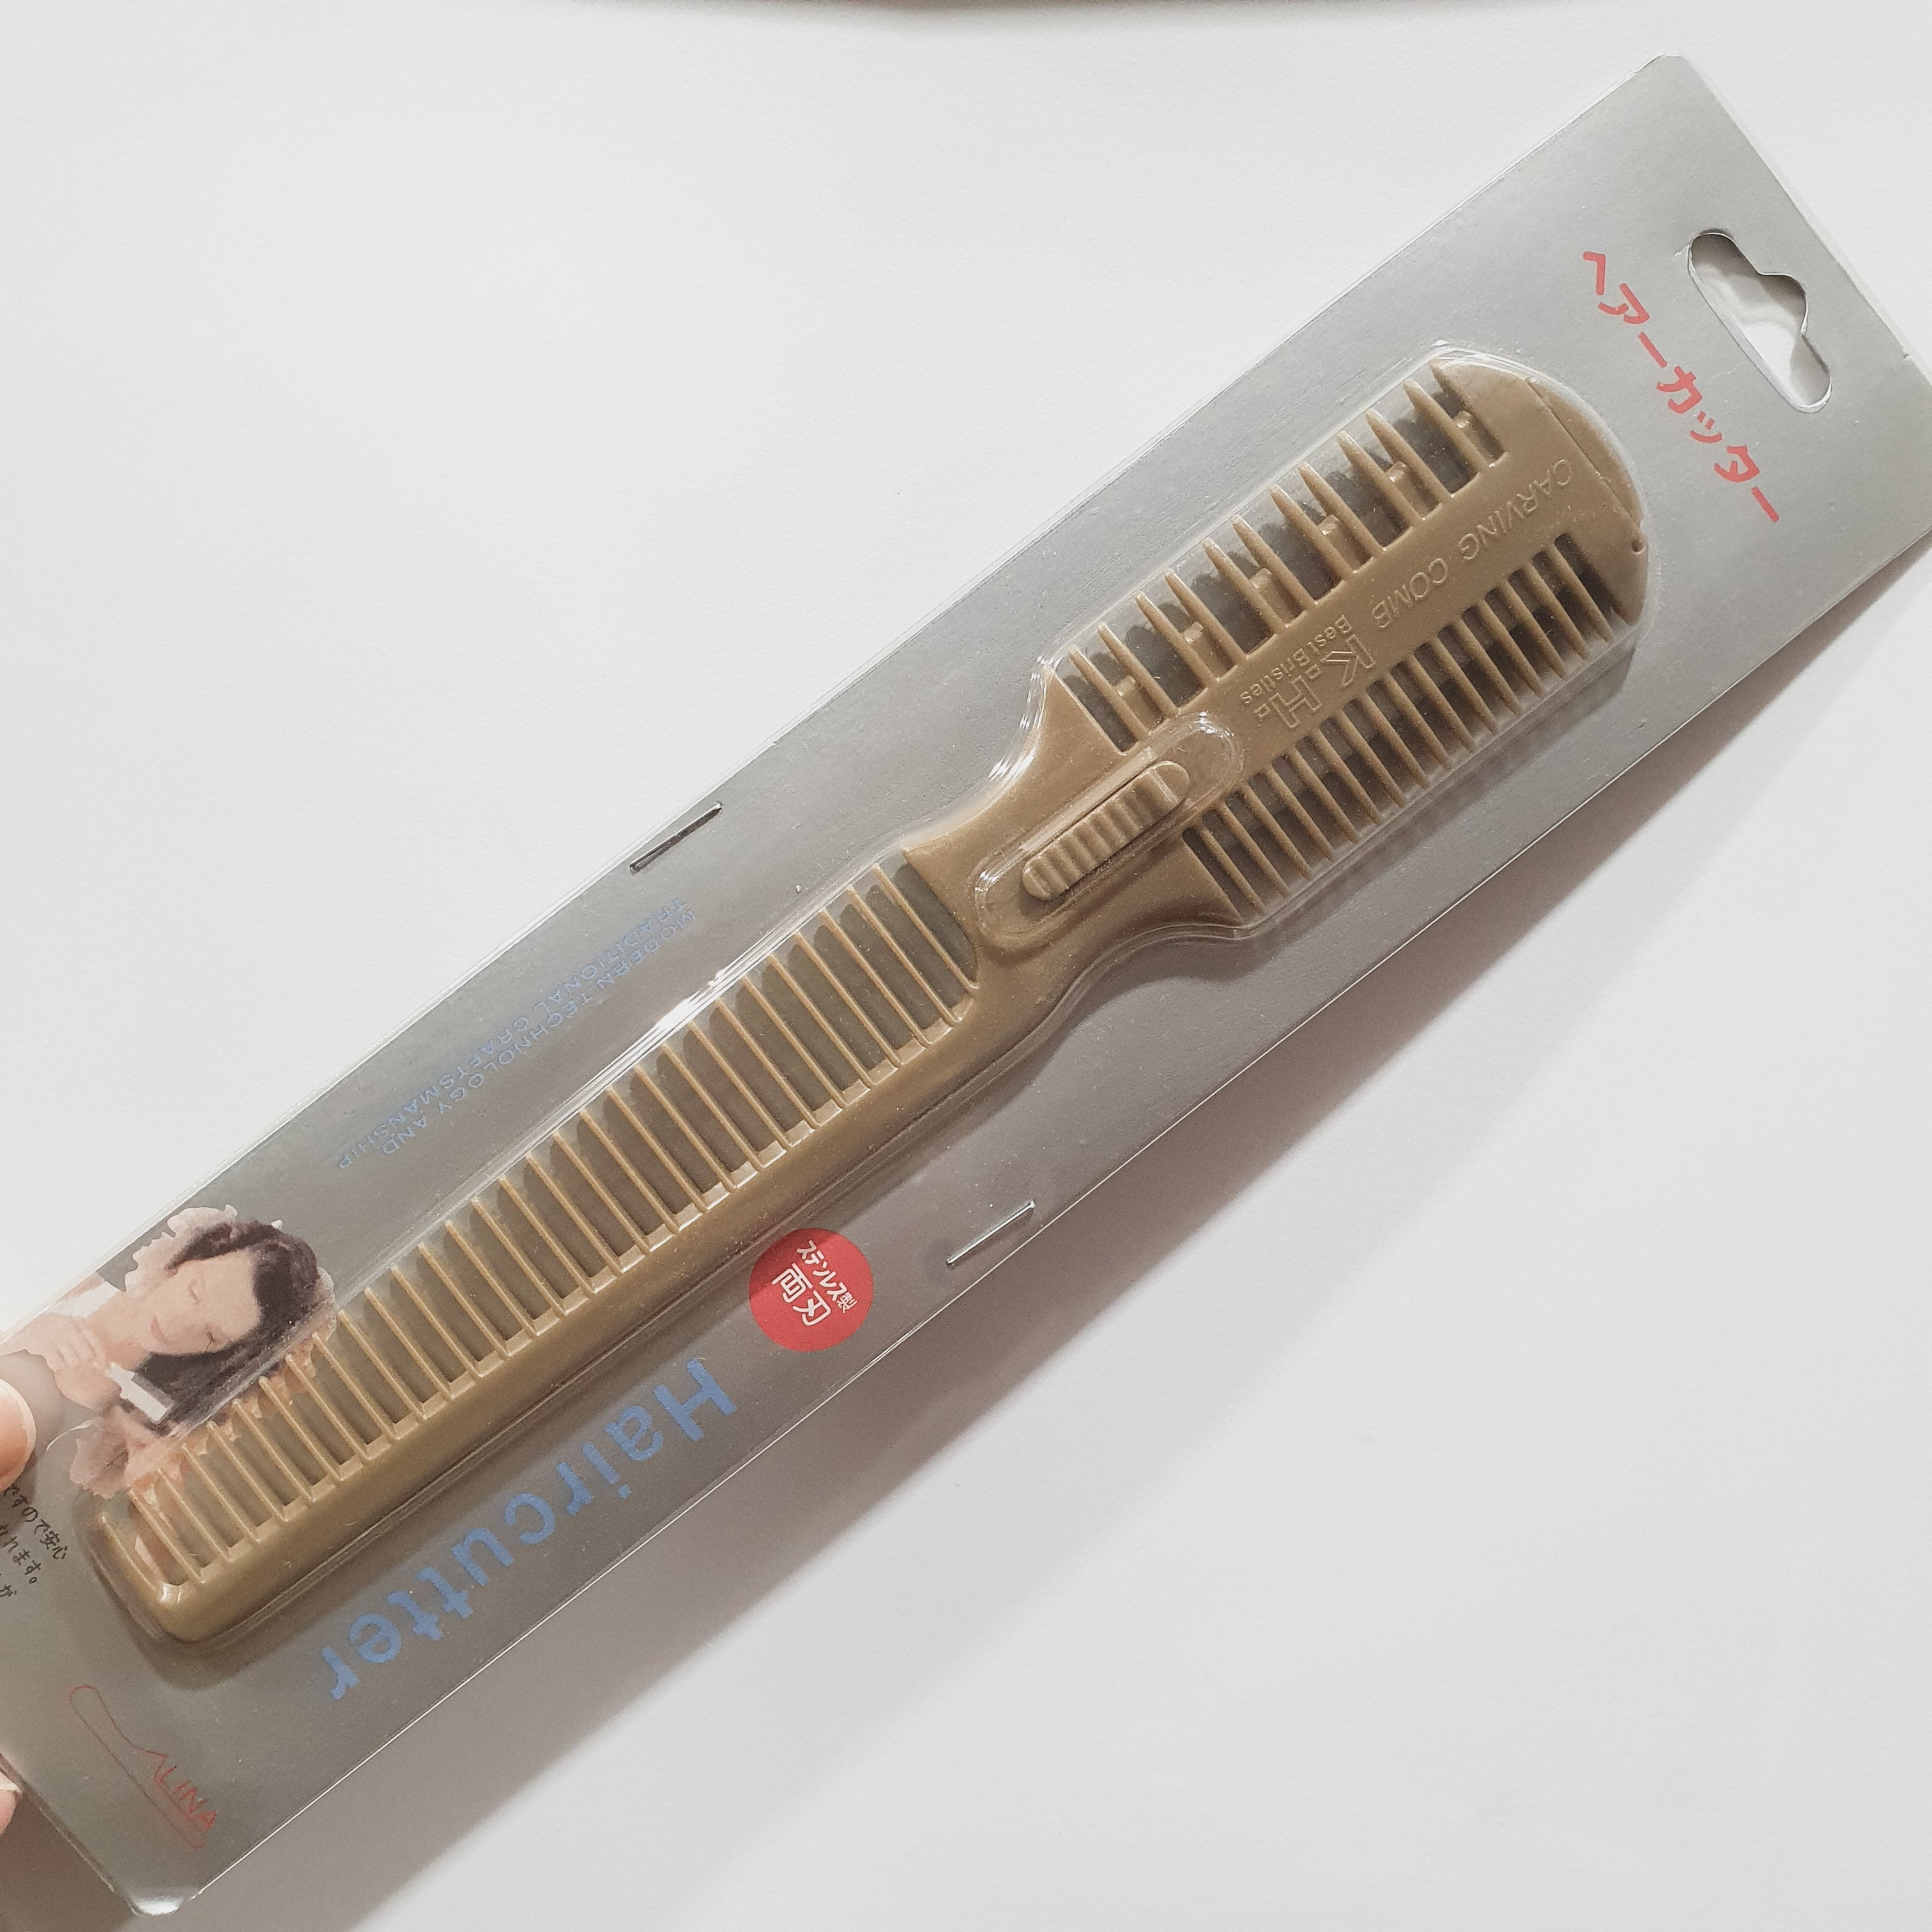 KH CARVING COMB HAIRCUTTER